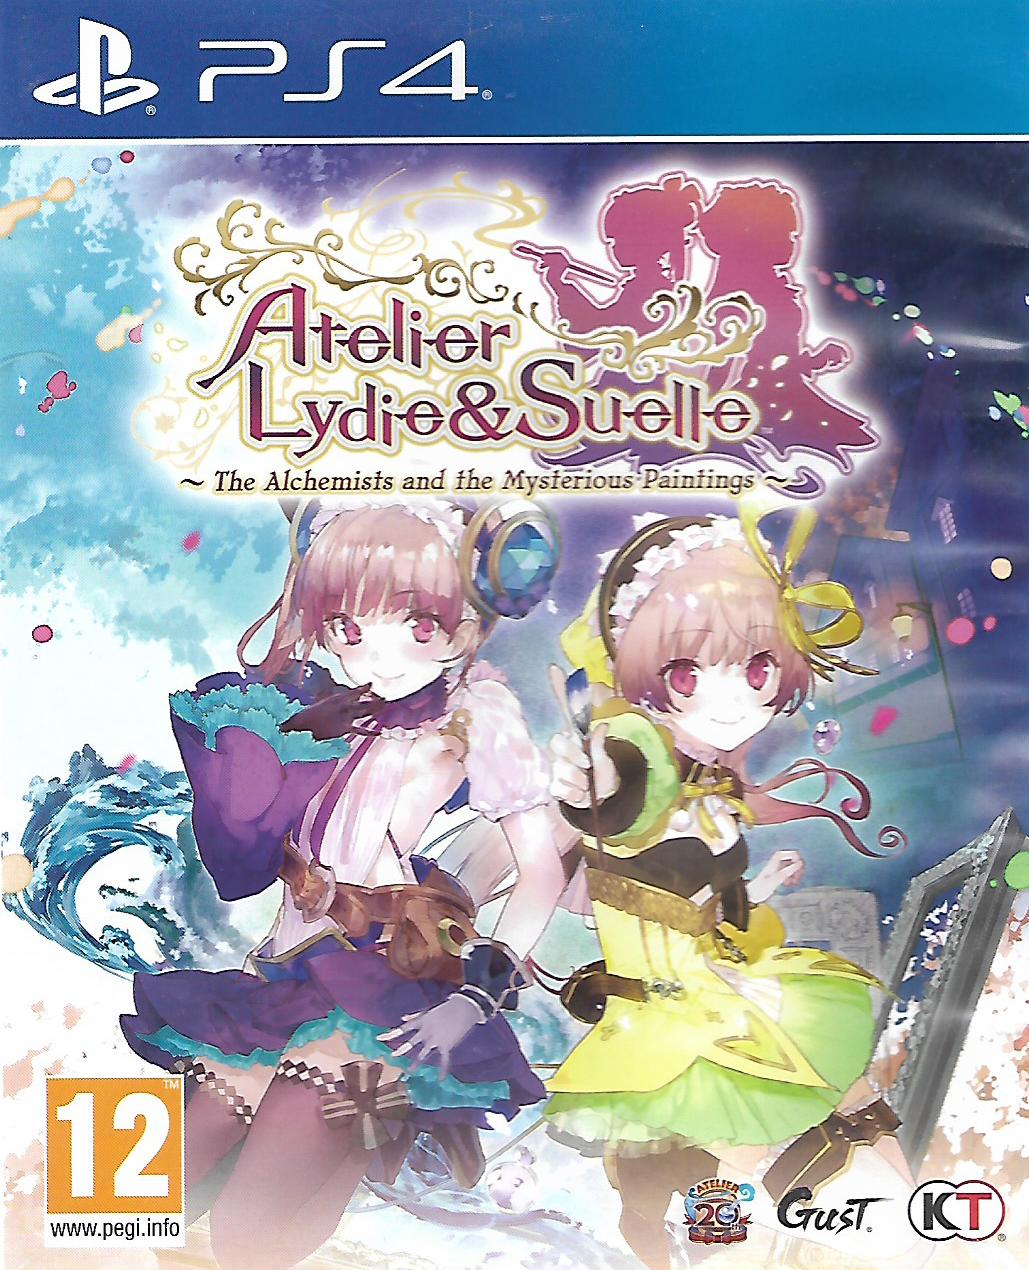 ATELIER LYDIE & SUELLE - THE ALCHEMISTS AND THE MYSTERIOUS PAINTINGS (PS4 - bazar)